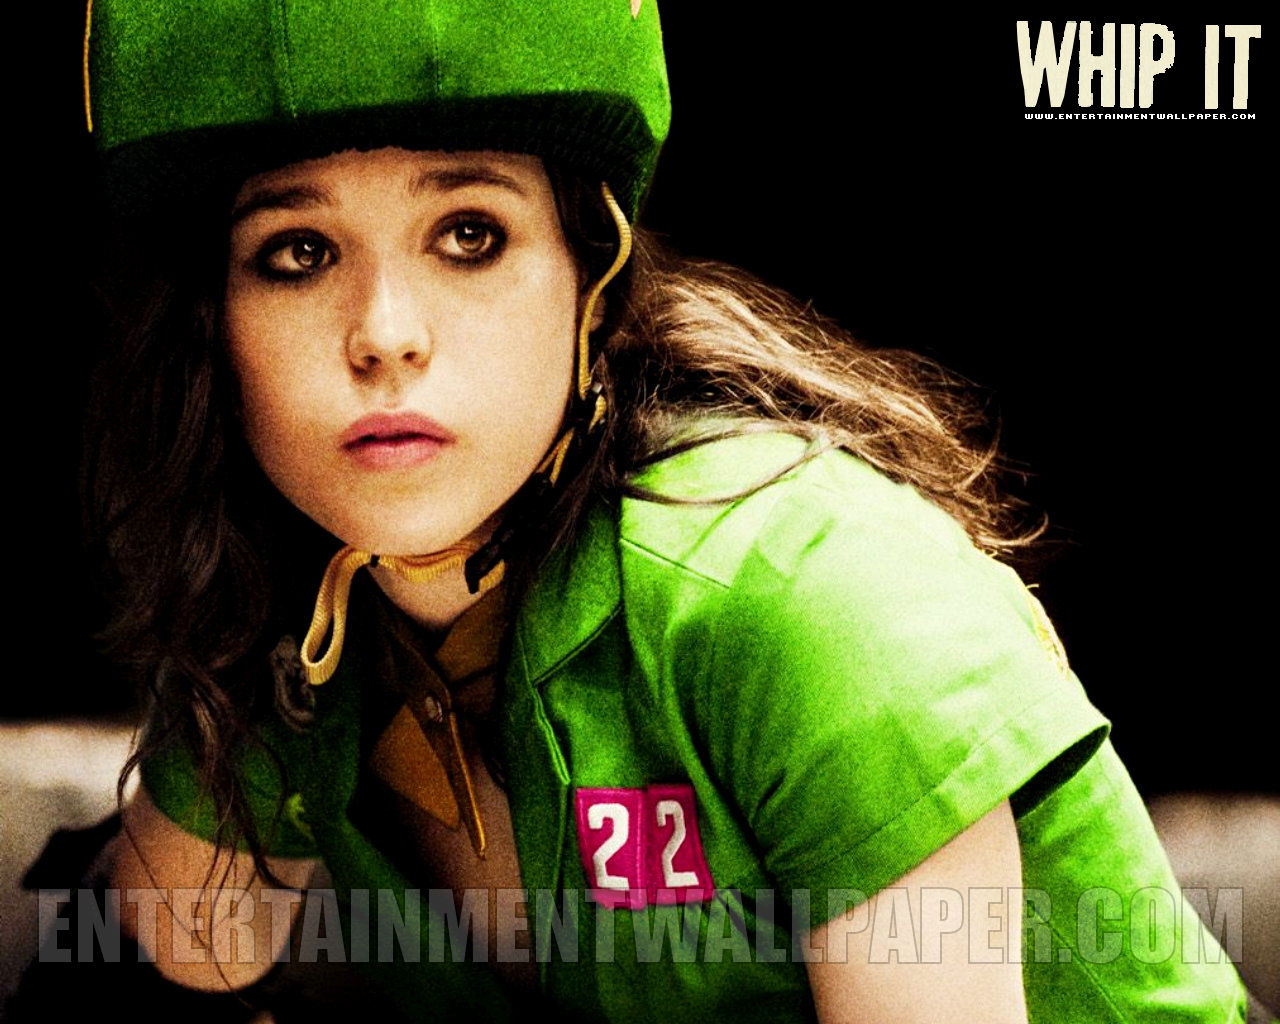 Whip It Wallpaper - Whip It Movie Poster , HD Wallpaper & Backgrounds